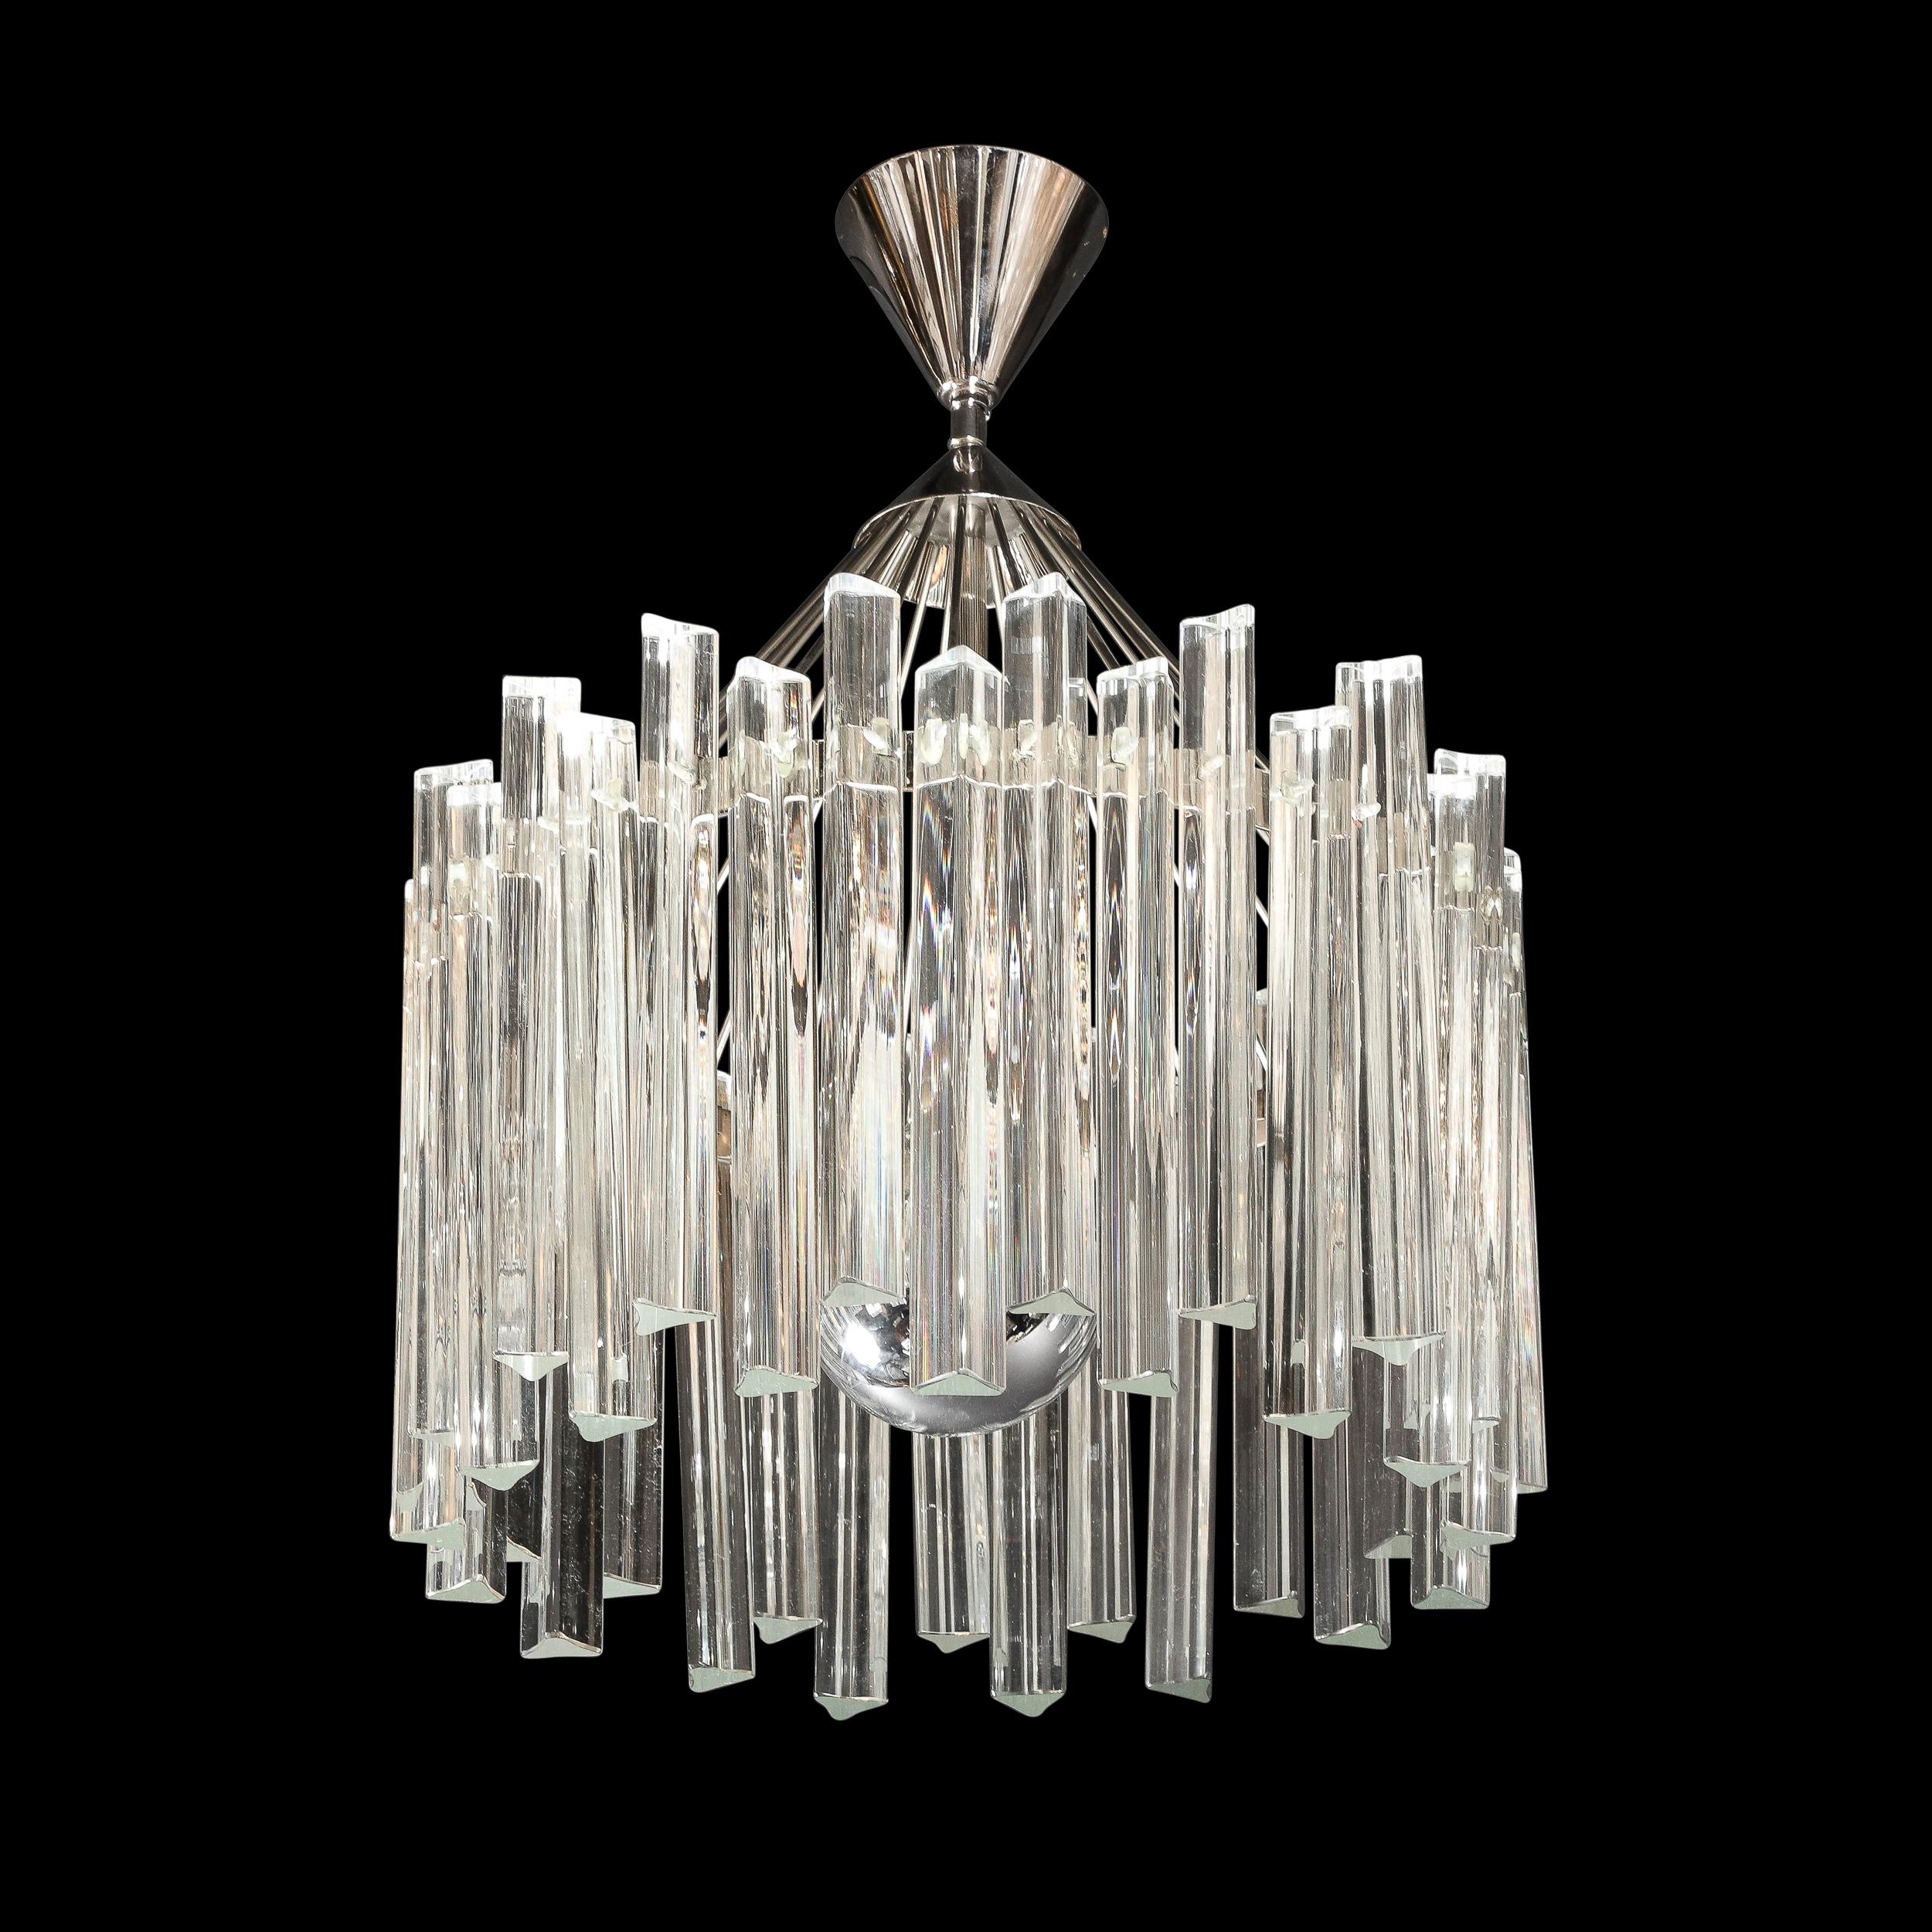 This stunning Mid Century Modern chandelier was realized in Murano, Italy circa 1970. It features a circular open form frame in lustrous polished chrome. with a wealth of translucent hand blown staggered Murano triedre crystals suspended around the